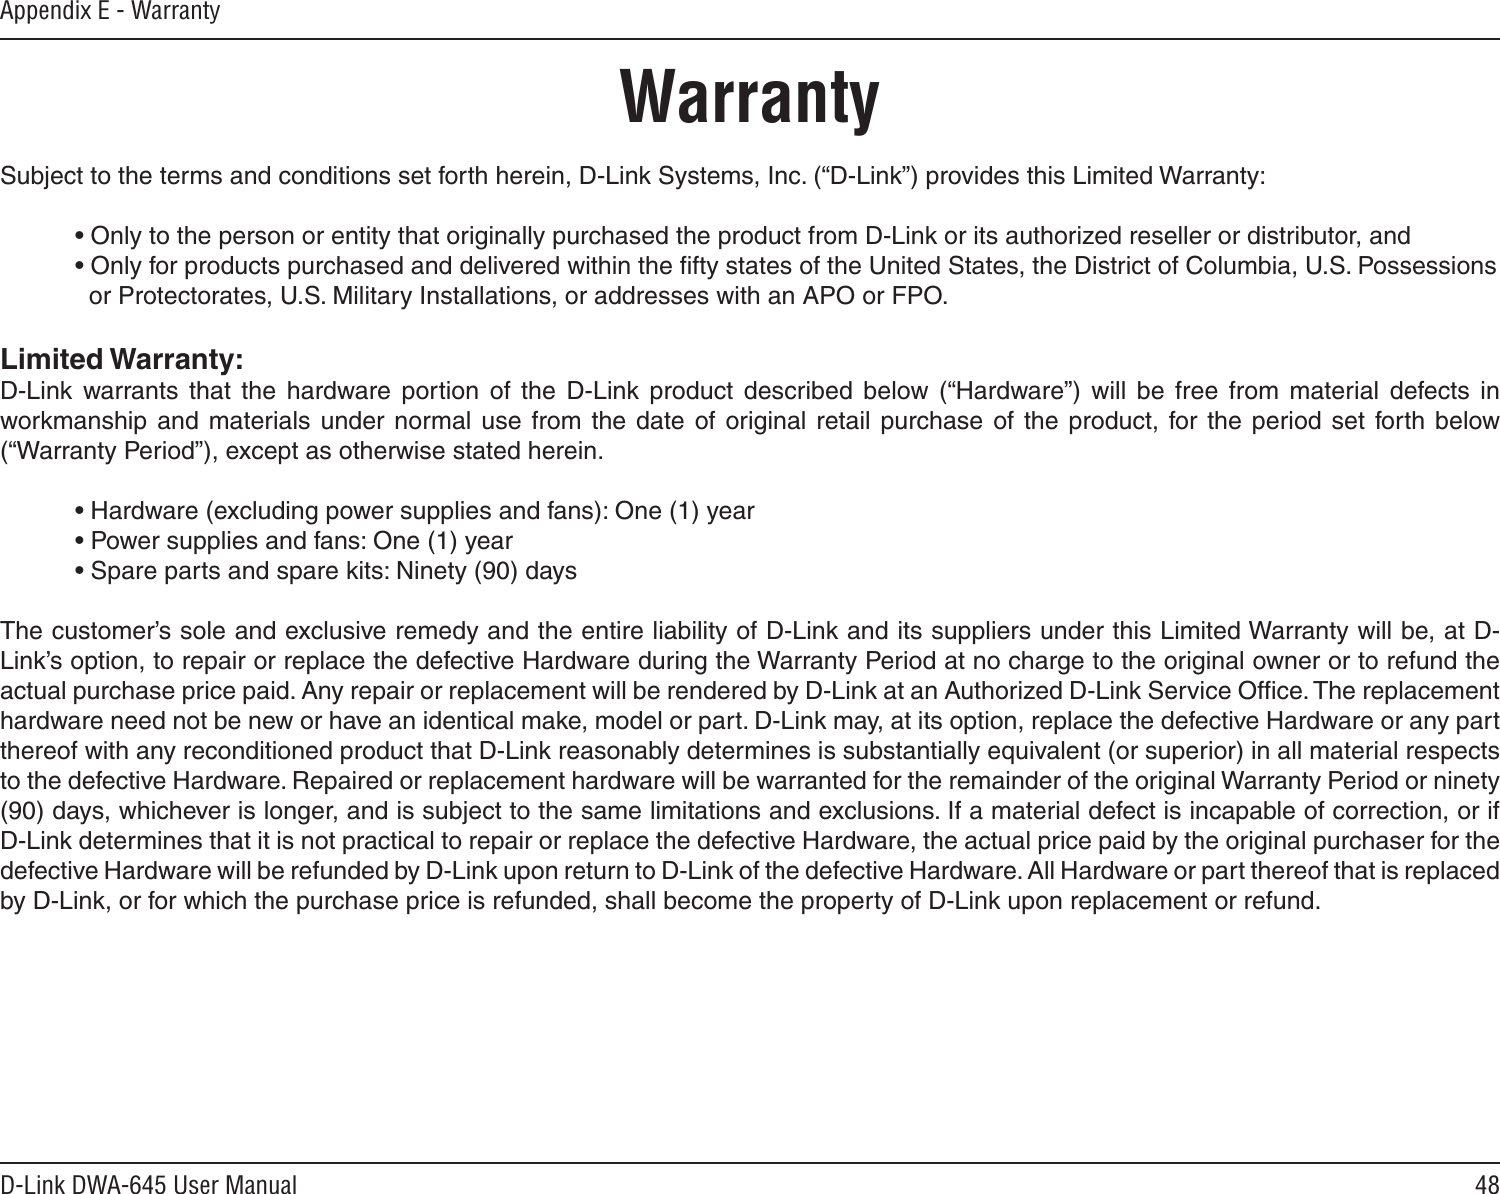 48D-Link DWA-645 User ManualAppendix E - WarrantyWarrantySubject to the terms and conditions set forth herein, D-Link Systems, Inc. (“D-Link”) provides this Limited Warranty:  • Only to the person or entity that originally purchased the product from D-Link or its authorized reseller or distributor, and  • Only for products purchased and delivered within the ﬁfty states of the United States, the District of Columbia, U.S. Possessions      or Protectorates, U.S. Military Installations, or addresses with an APO or FPO.Limited Warranty:D-Link  warrants that  the  hardware  portion  of  the  D-Link  product  described  below  (“Hardware”)  will  be  free  from  material  defects  in workmanship  and materials under  normal  use  from the  date of  original  retail purchase  of the  product, for the  period  set forth  below (“Warranty Period”), except as otherwise stated herein.  • Hardware (excluding power supplies and fans): One (1) year  • Power supplies and fans: One (1) year  • Spare parts and spare kits: Ninety (90) daysThe customer’s sole and exclusive remedy and the entire liability of D-Link and its suppliers under this Limited Warranty will be, at D-Link’s option, to repair or replace the defective Hardware during the Warranty Period at no charge to the original owner or to refund the actual purchase price paid. Any repair or replacement will be rendered by D-Link at an Authorized D-Link Service Ofﬁce. The replacement hardware need not be new or have an identical make, model or part. D-Link may, at its option, replace the defective Hardware or any part thereof with any reconditioned product that D-Link reasonably determines is substantially equivalent (or superior) in all material respects to the defective Hardware. Repaired or replacement hardware will be warranted for the remainder of the original Warranty Period or ninety (90) days, whichever is longer, and is subject to the same limitations and exclusions. If a material defect is incapable of correction, or if D-Link determines that it is not practical to repair or replace the defective Hardware, the actual price paid by the original purchaser for the defective Hardware will be refunded by D-Link upon return to D-Link of the defective Hardware. All Hardware or part thereof that is replaced by D-Link, or for which the purchase price is refunded, shall become the property of D-Link upon replacement or refund.